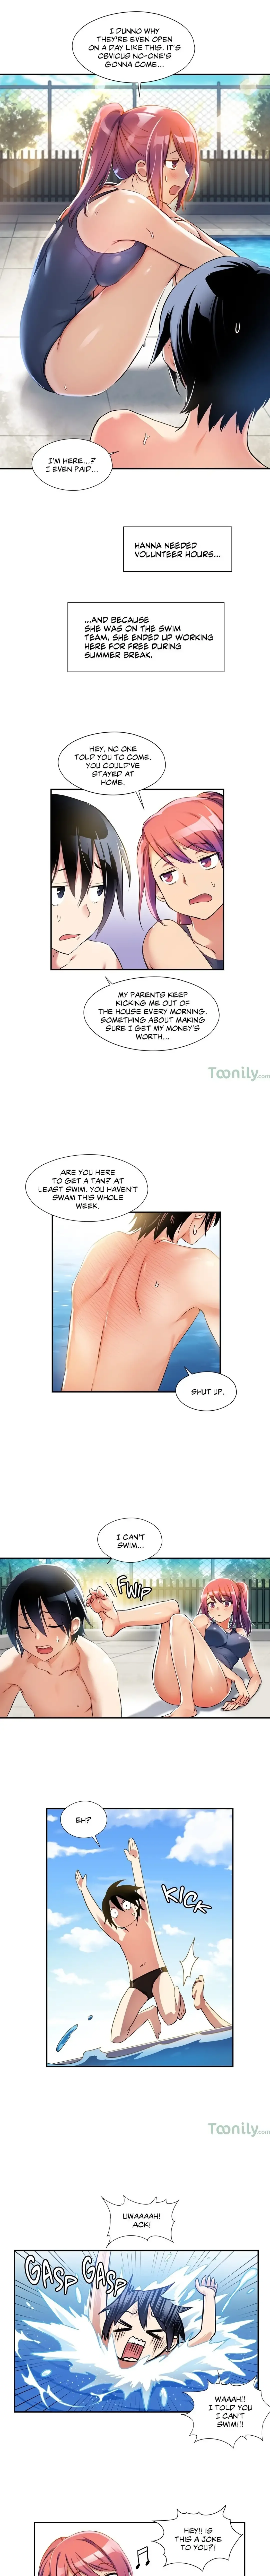 under-observation-my-first-loves-and-i-chap-3-5